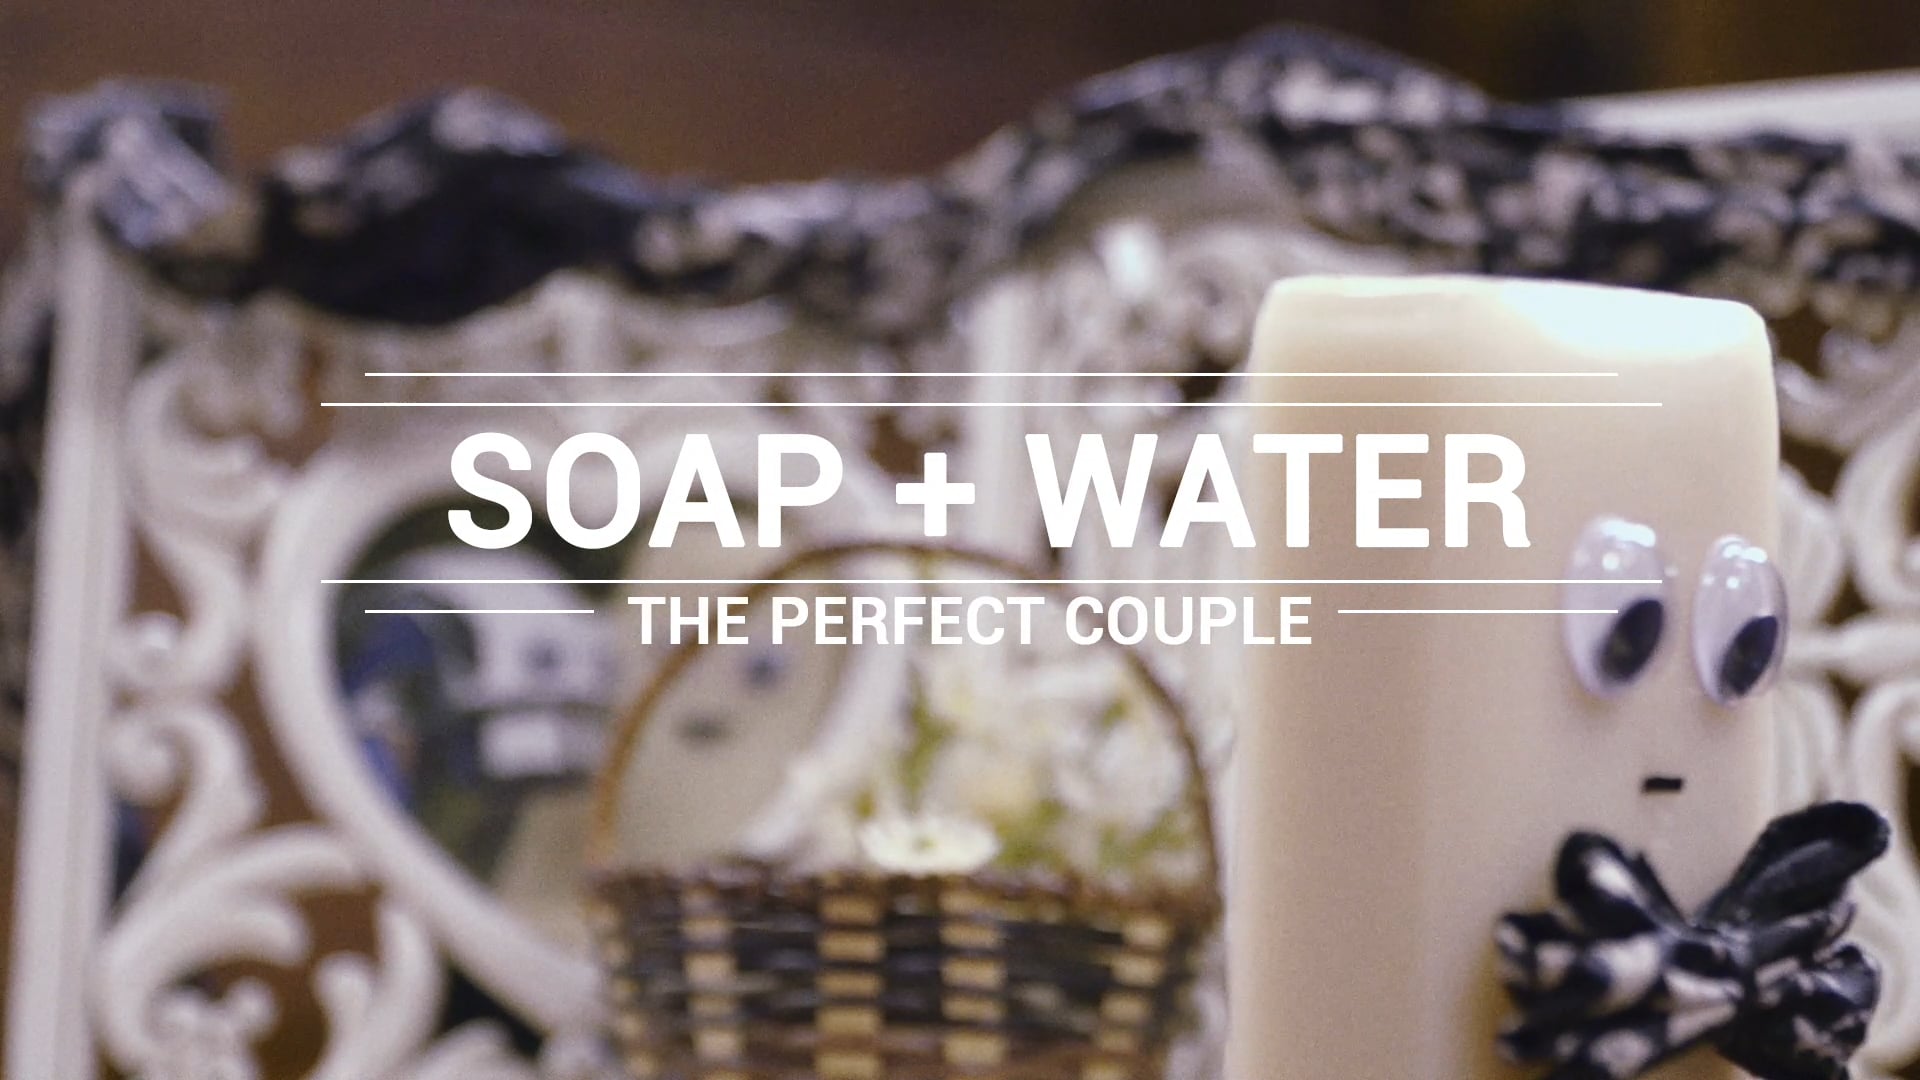 Soap & Water: The Perfect Couple - Unicef PSA